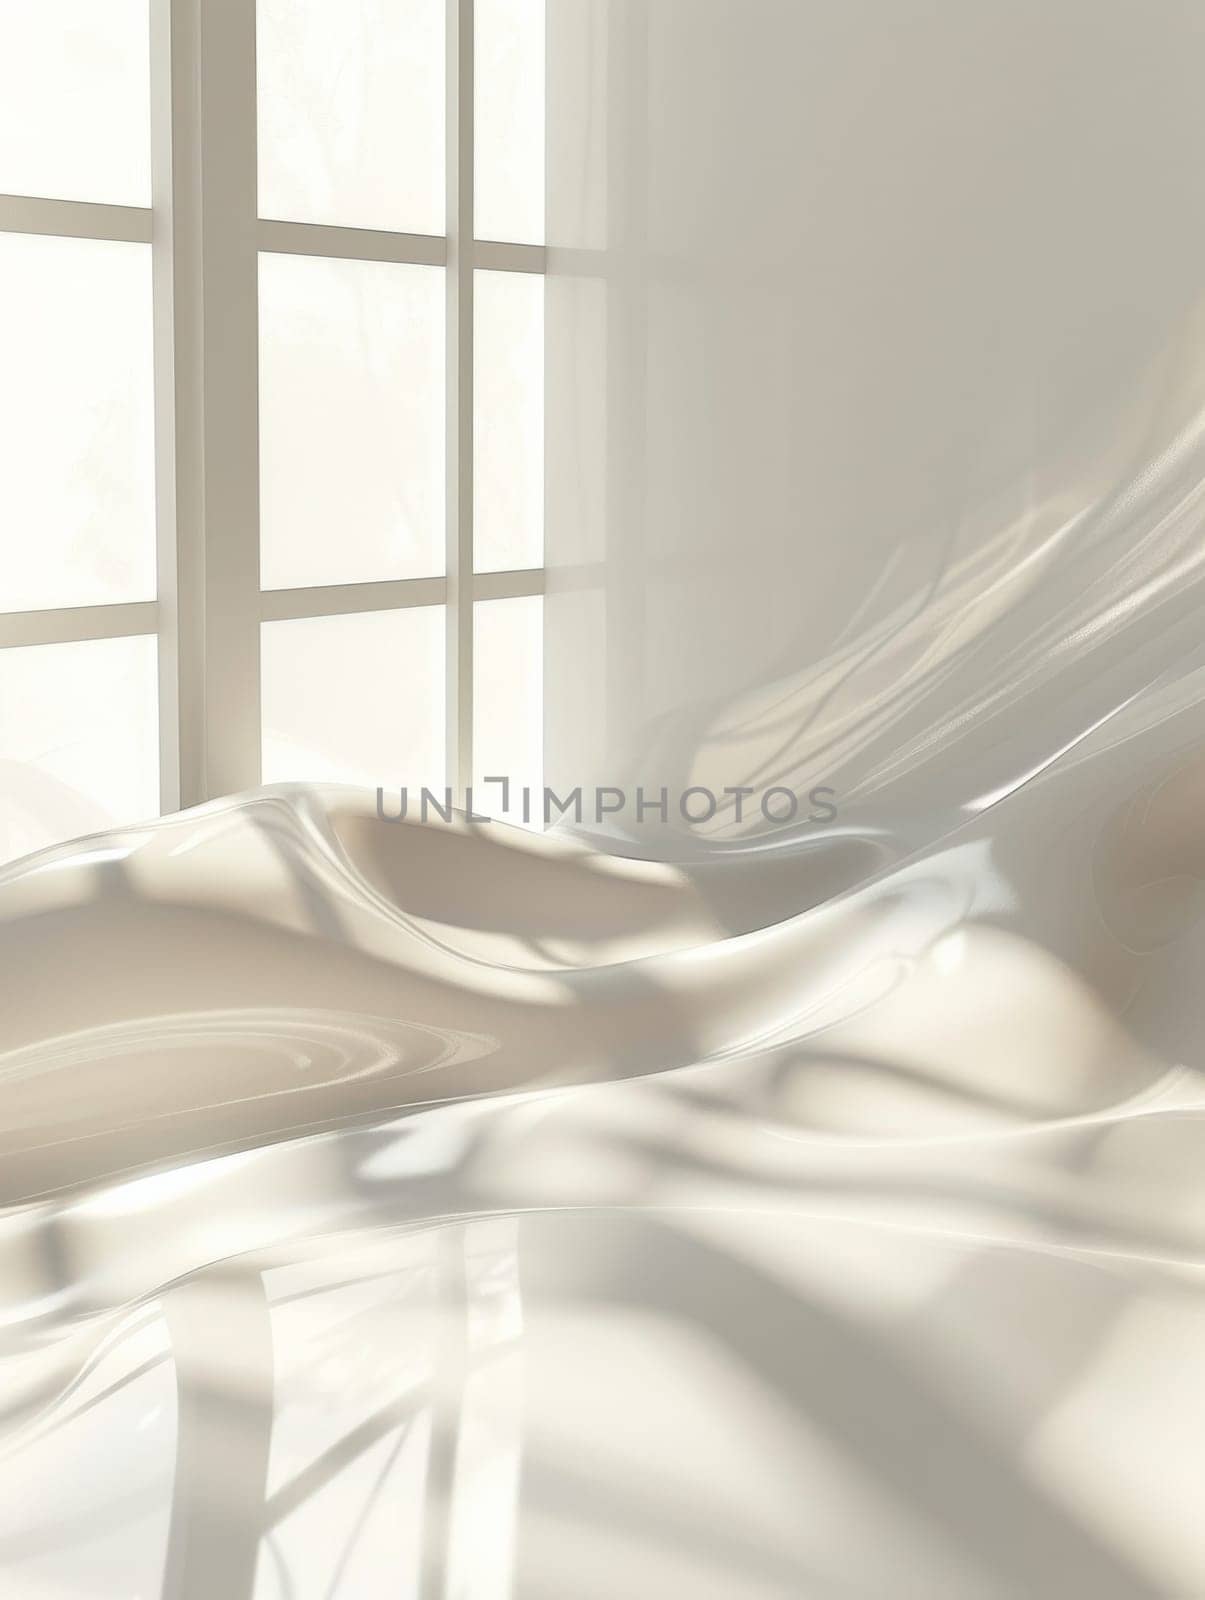 A white sheet of plastic is draped over a chair. The sheet is shiny and reflective, and the chair is positioned in front of a window. The scene is serene and peaceful